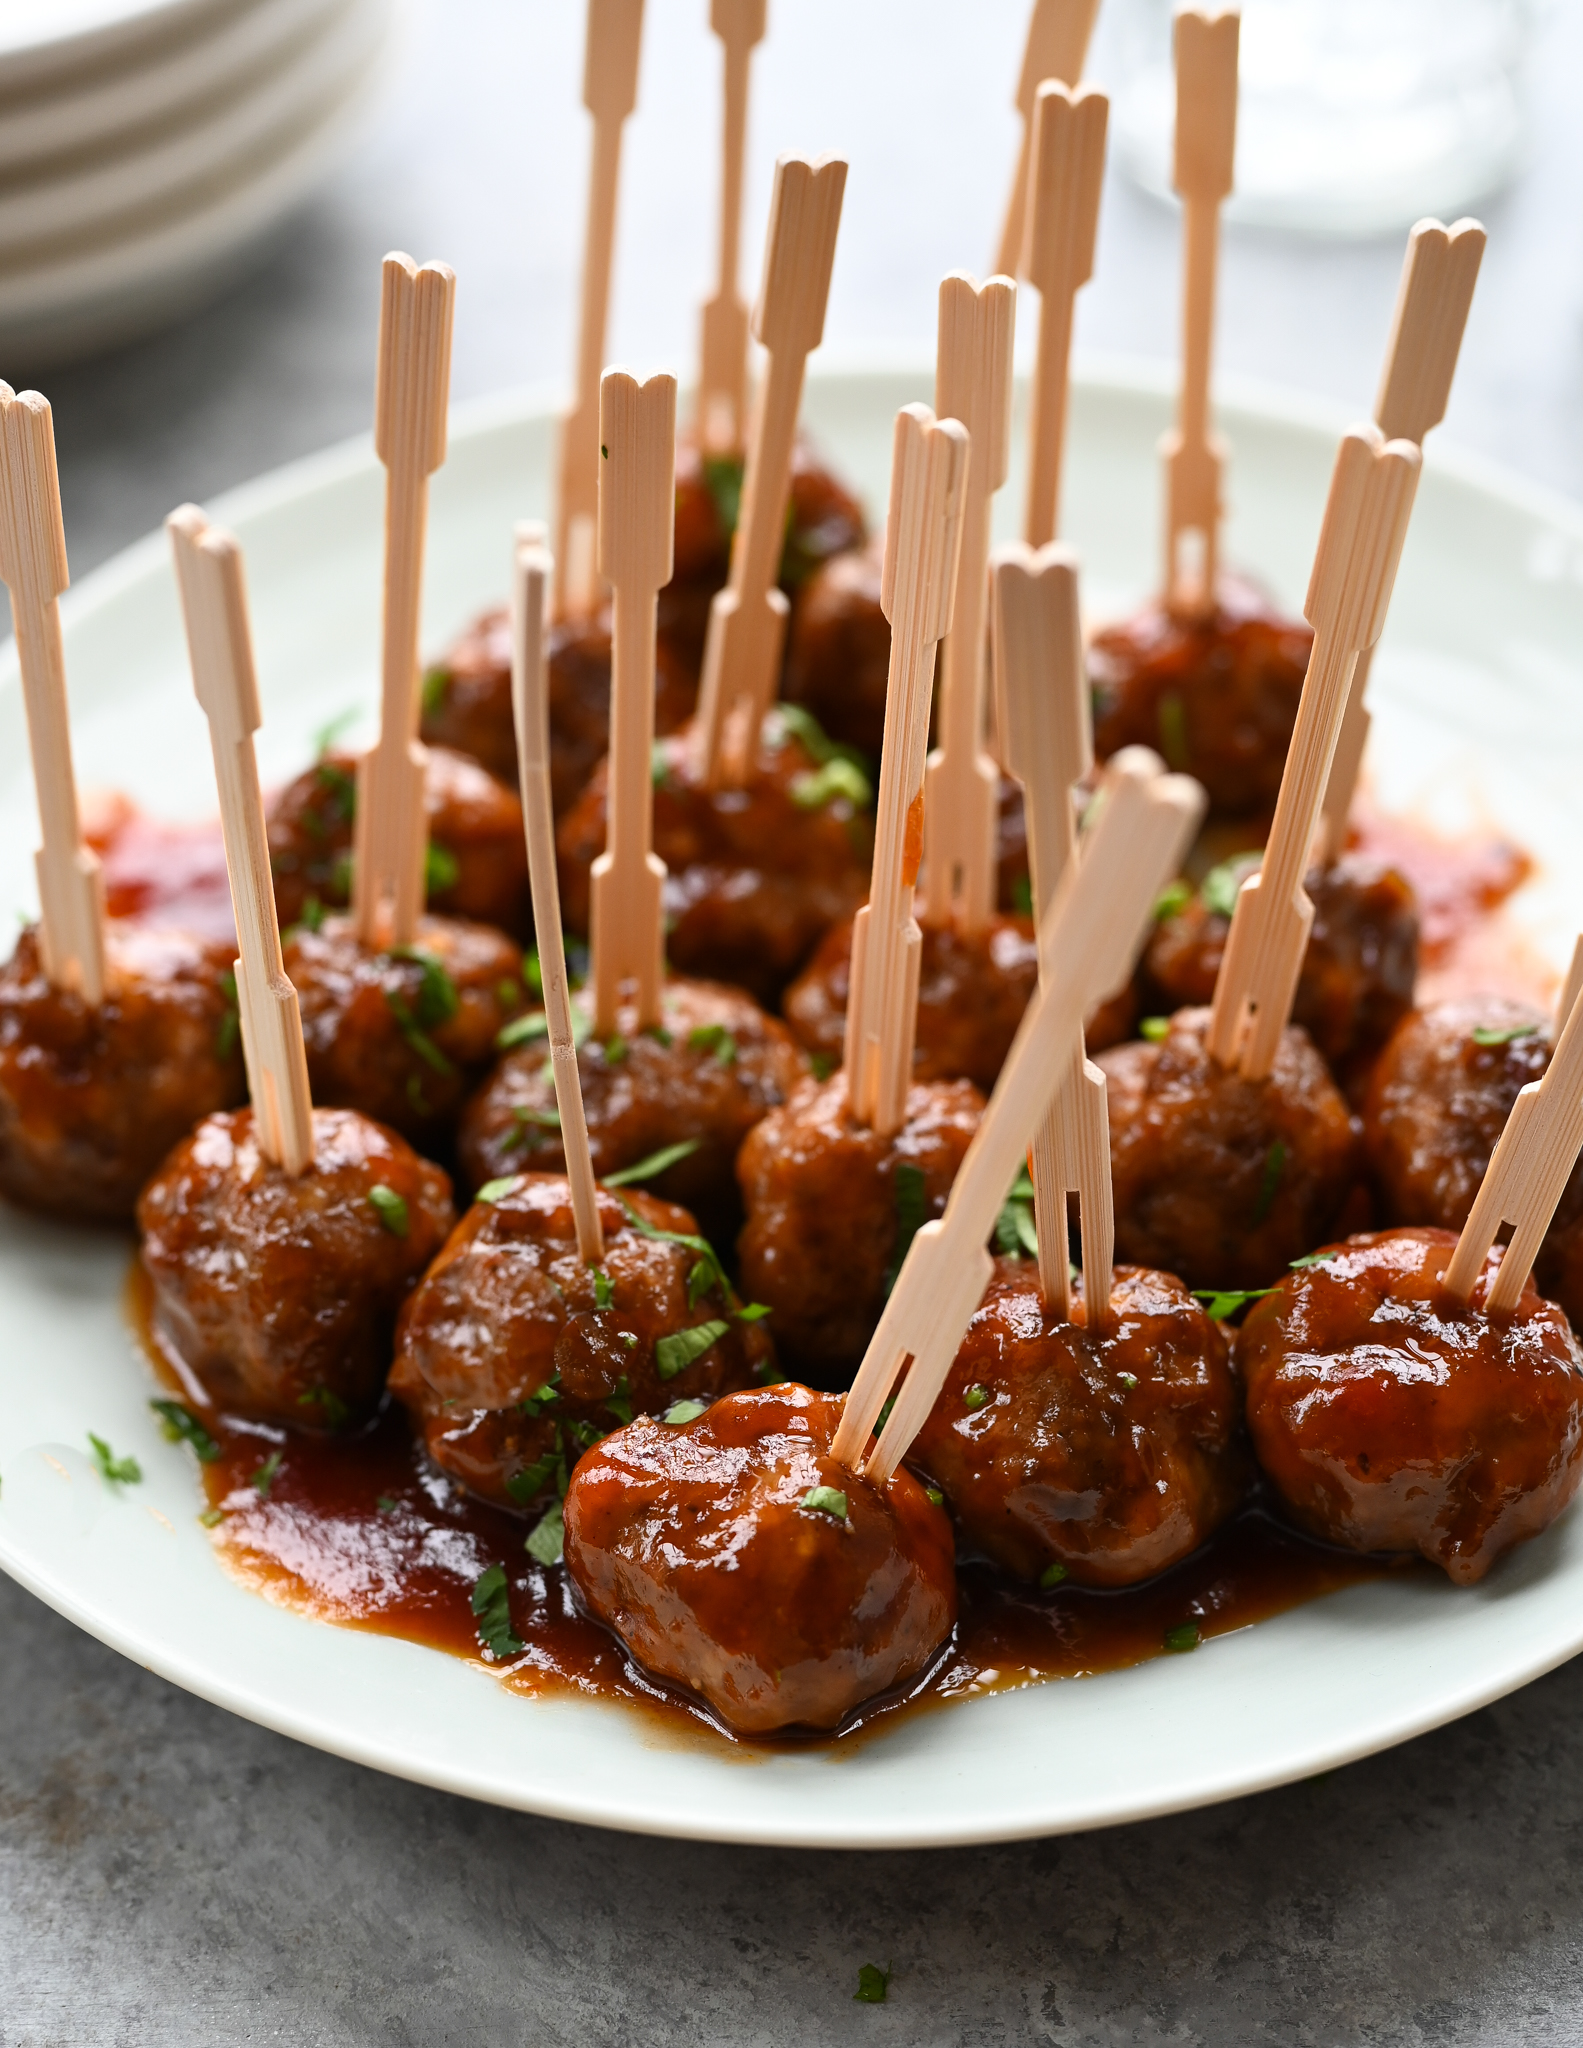 How to Serve Meatballs to Baby: A Complete Guide